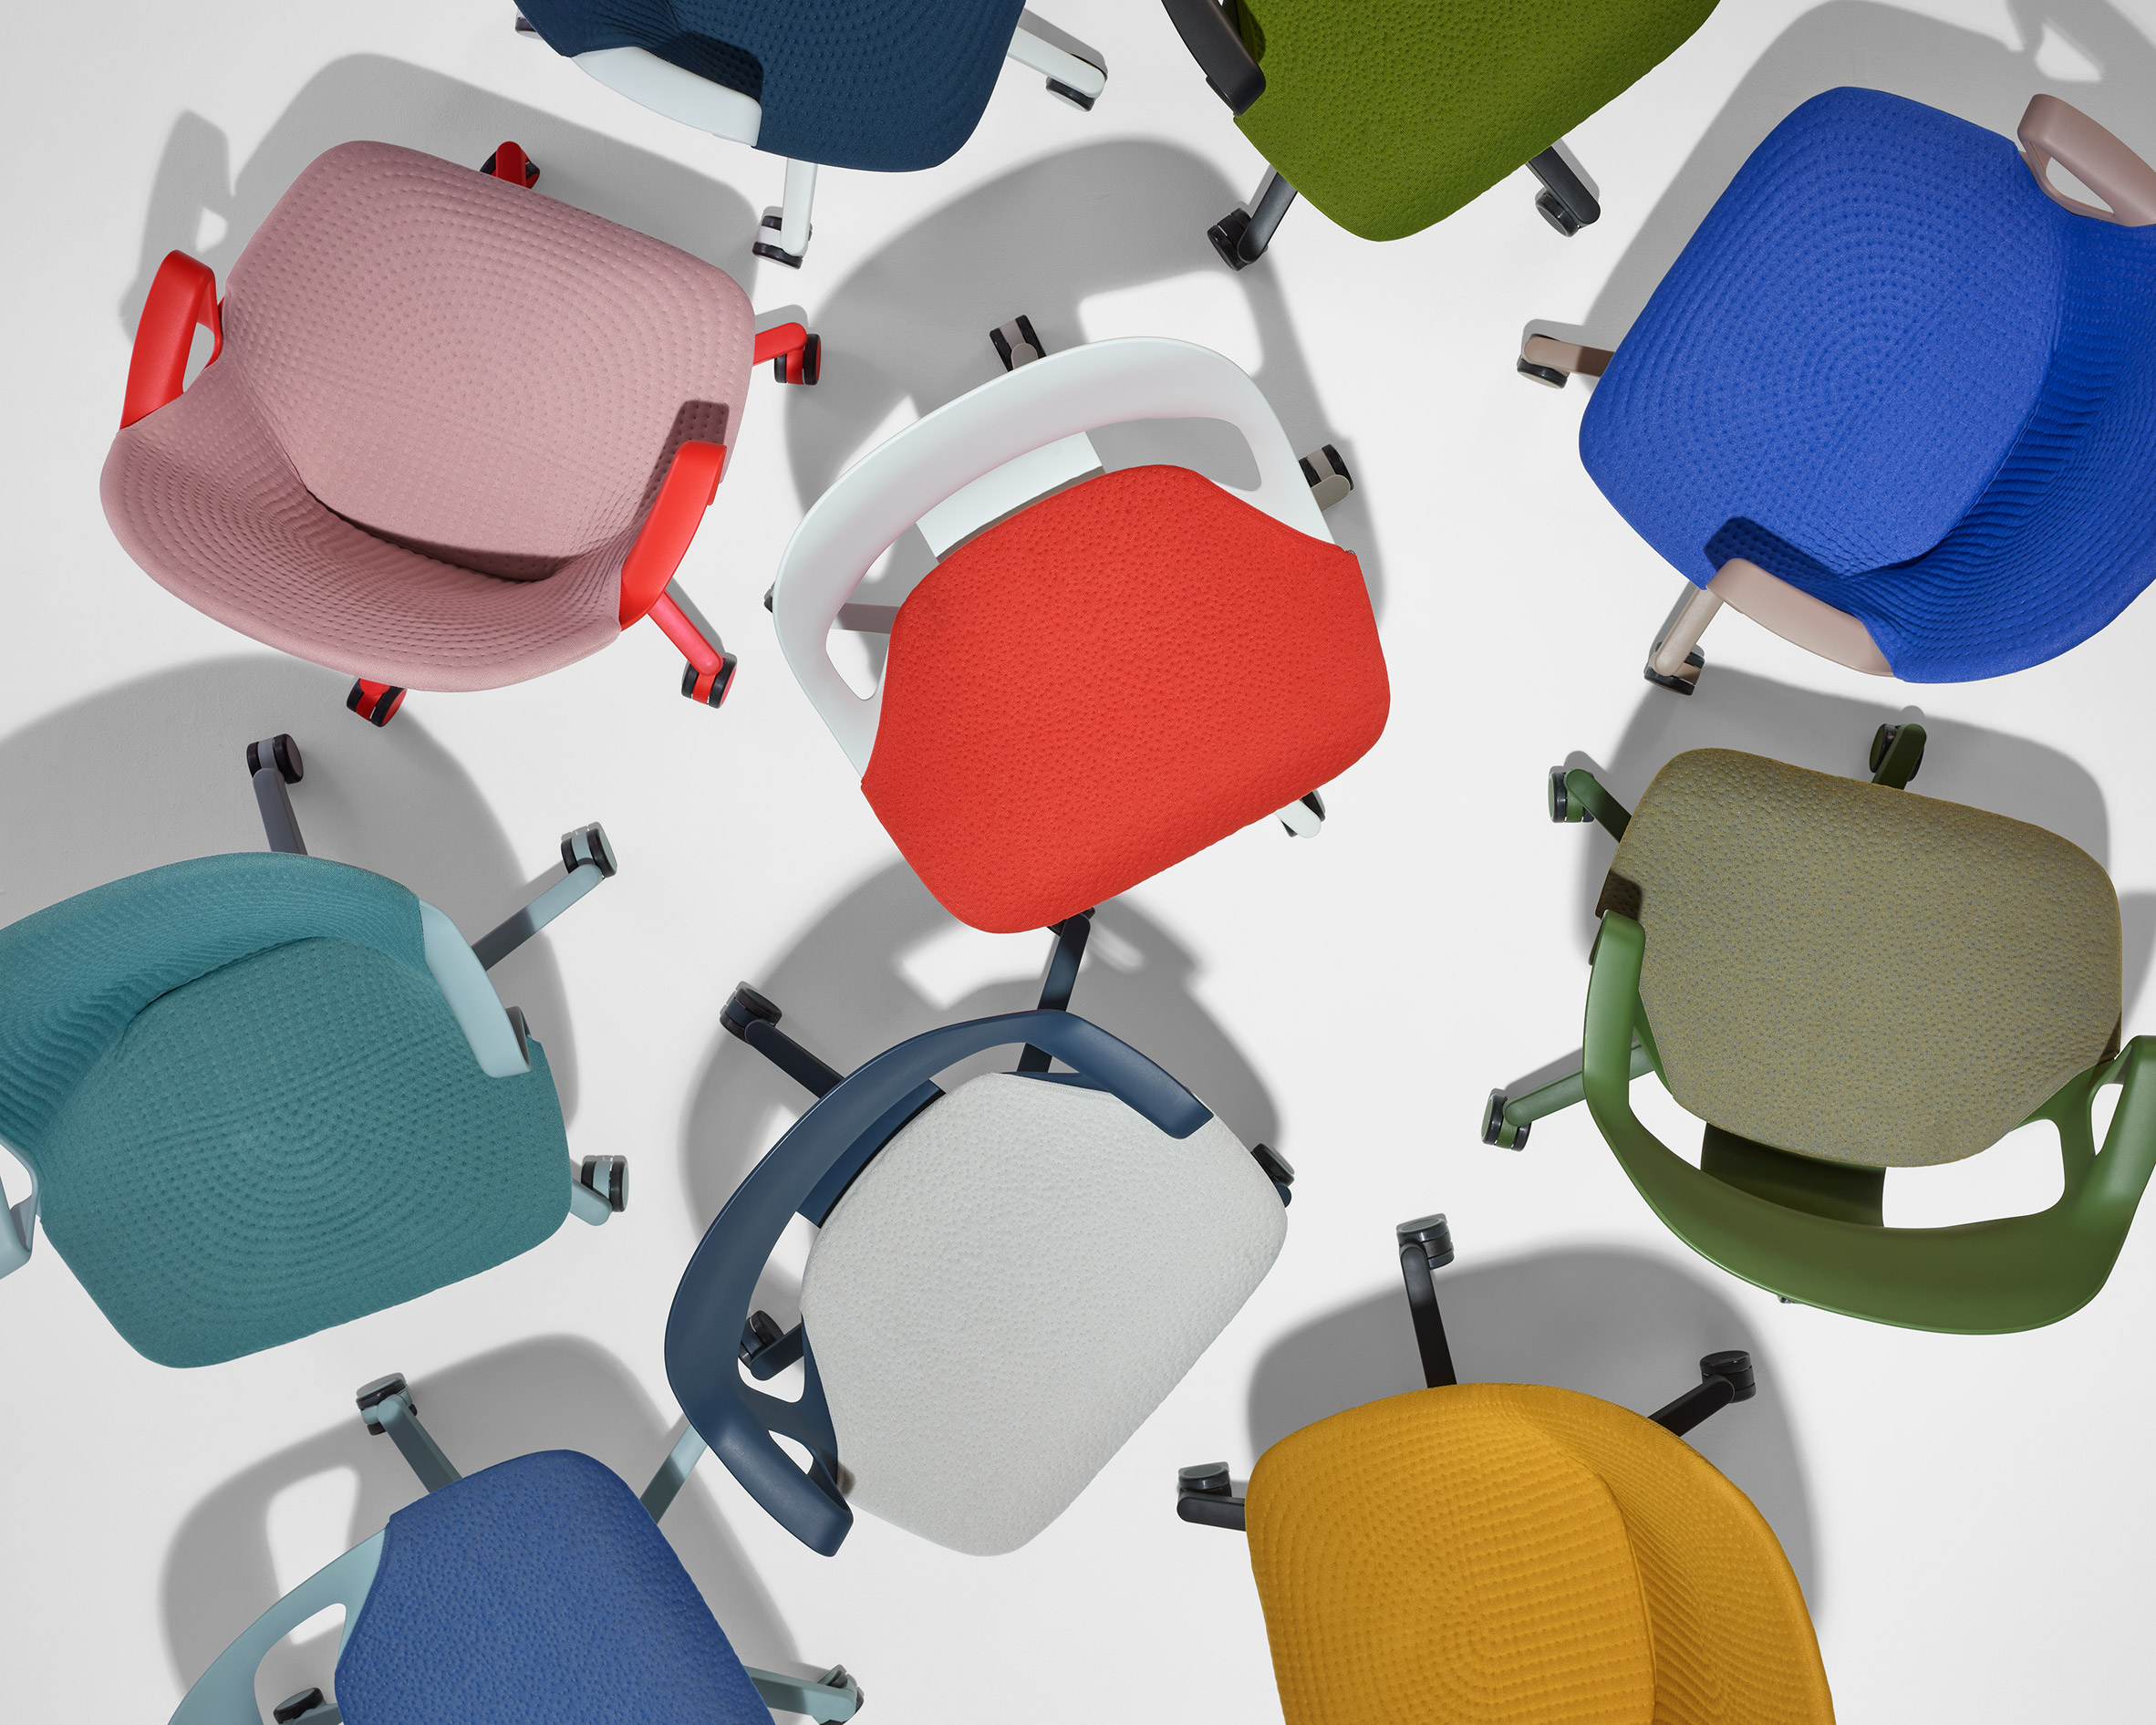 The Zeph Chair in a range of colours – blue, pink, red and green